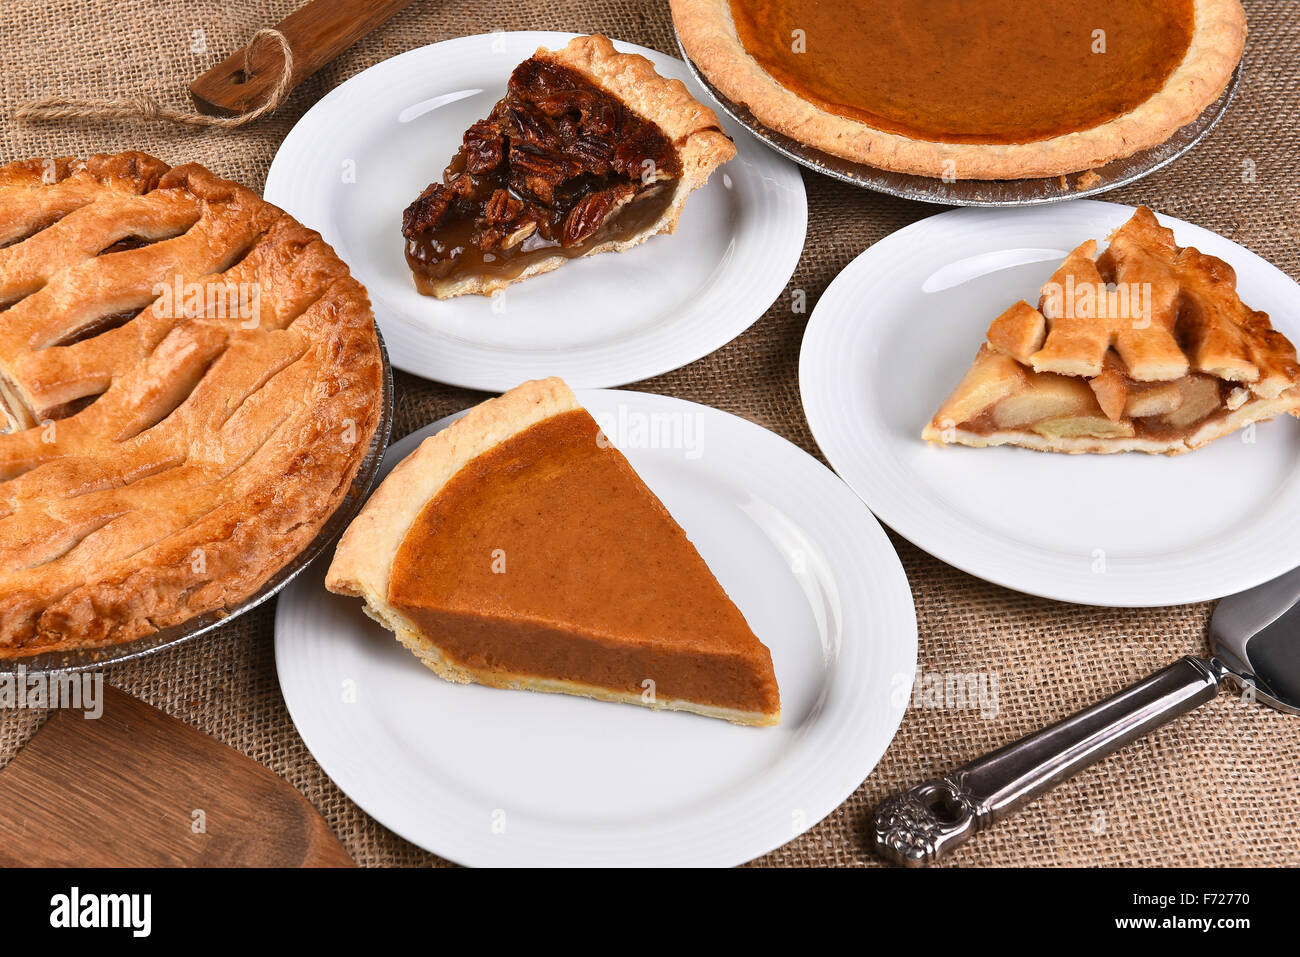 High angle view of whole pies and plates with slices. Traditional Thanksgiving desserts include, Pecan Pie, Apple Pie and Pumpki Stock Photo